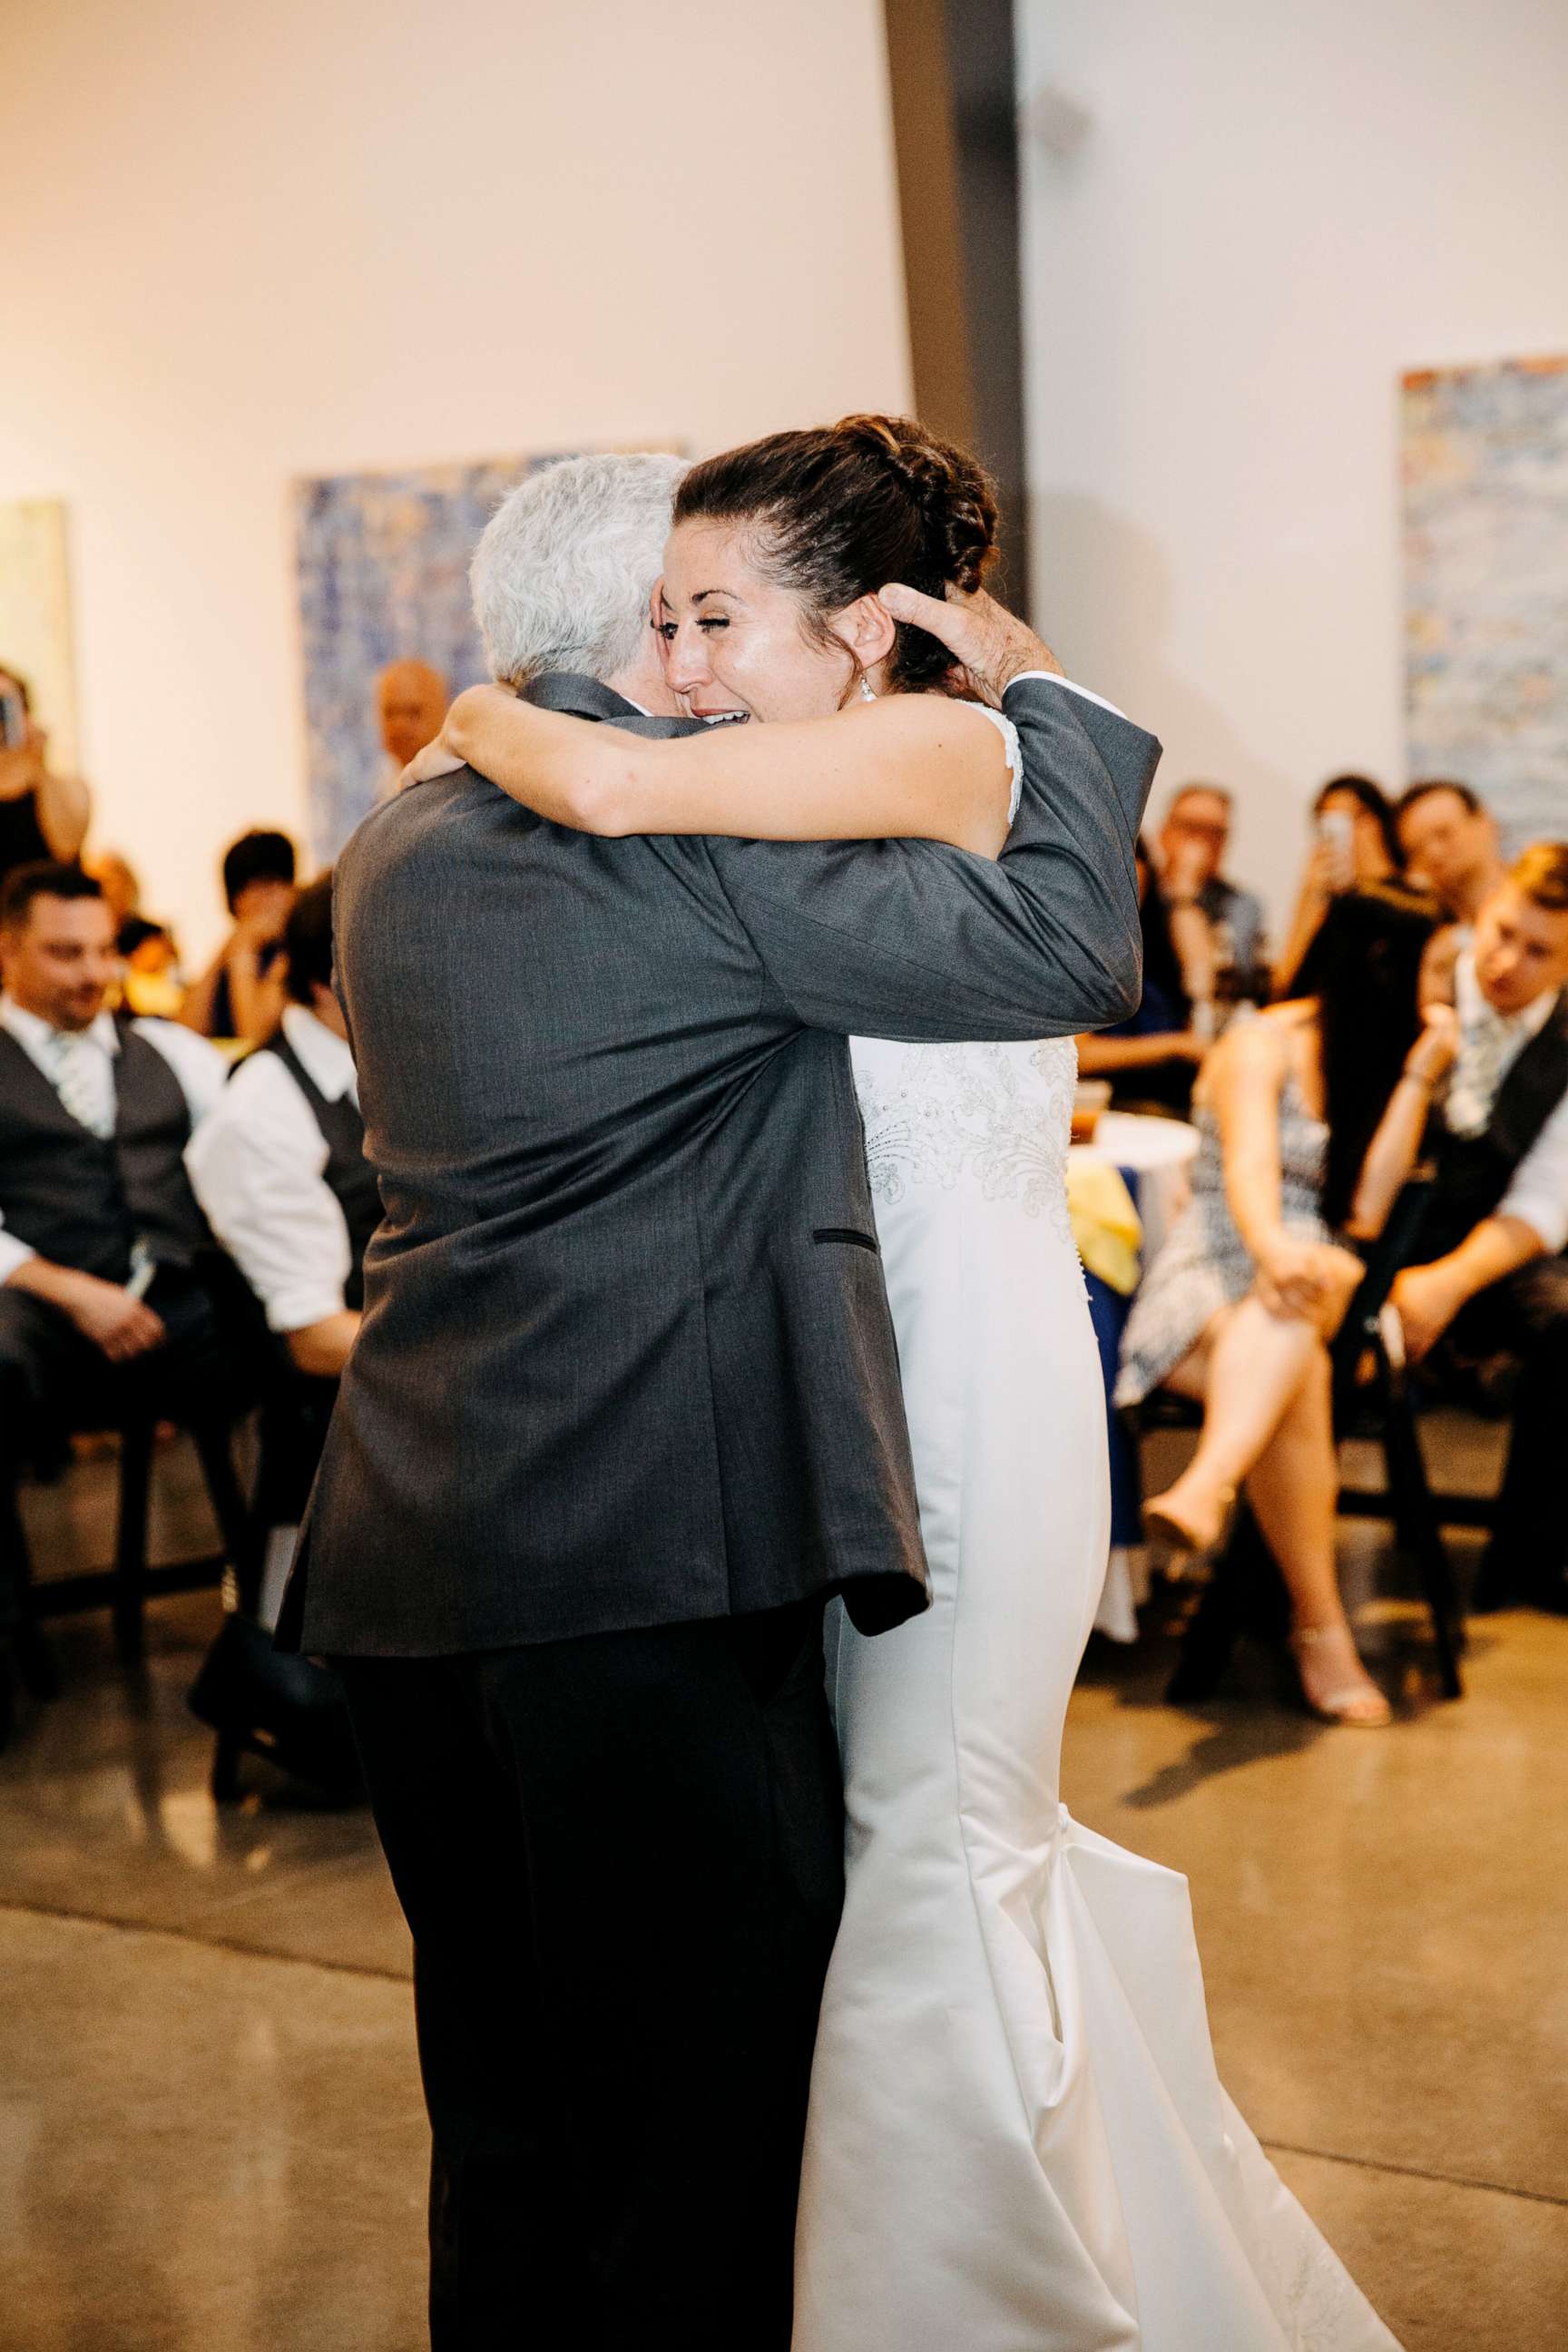 PHOTO: Jim Stamp, 70, of Colorado, who a few years back was diagnosed with a rare autoimmune disorder, ditched his cane to dance with his daughter Gina Ross and walk her down the aisle on her wedding day.